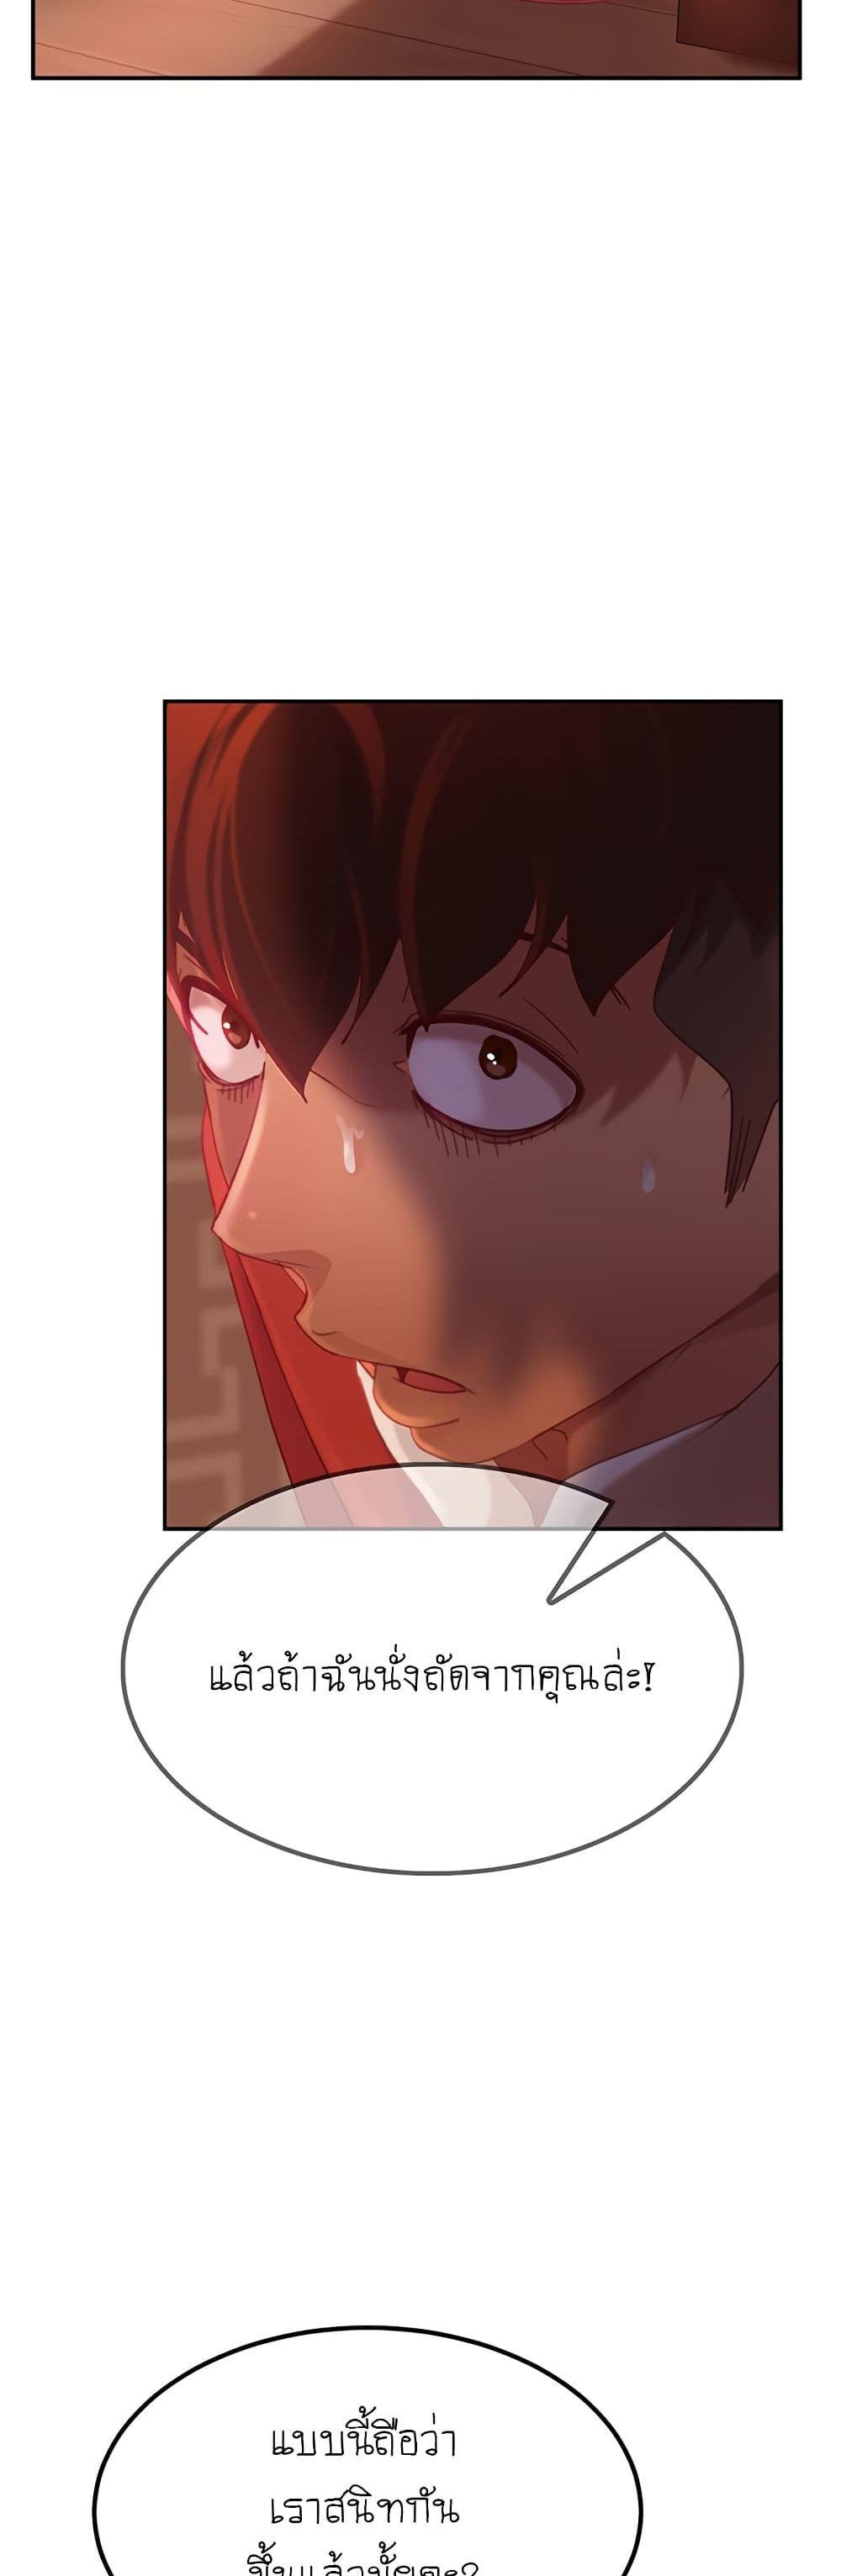 A Twisted Day 4 ภาพ 17